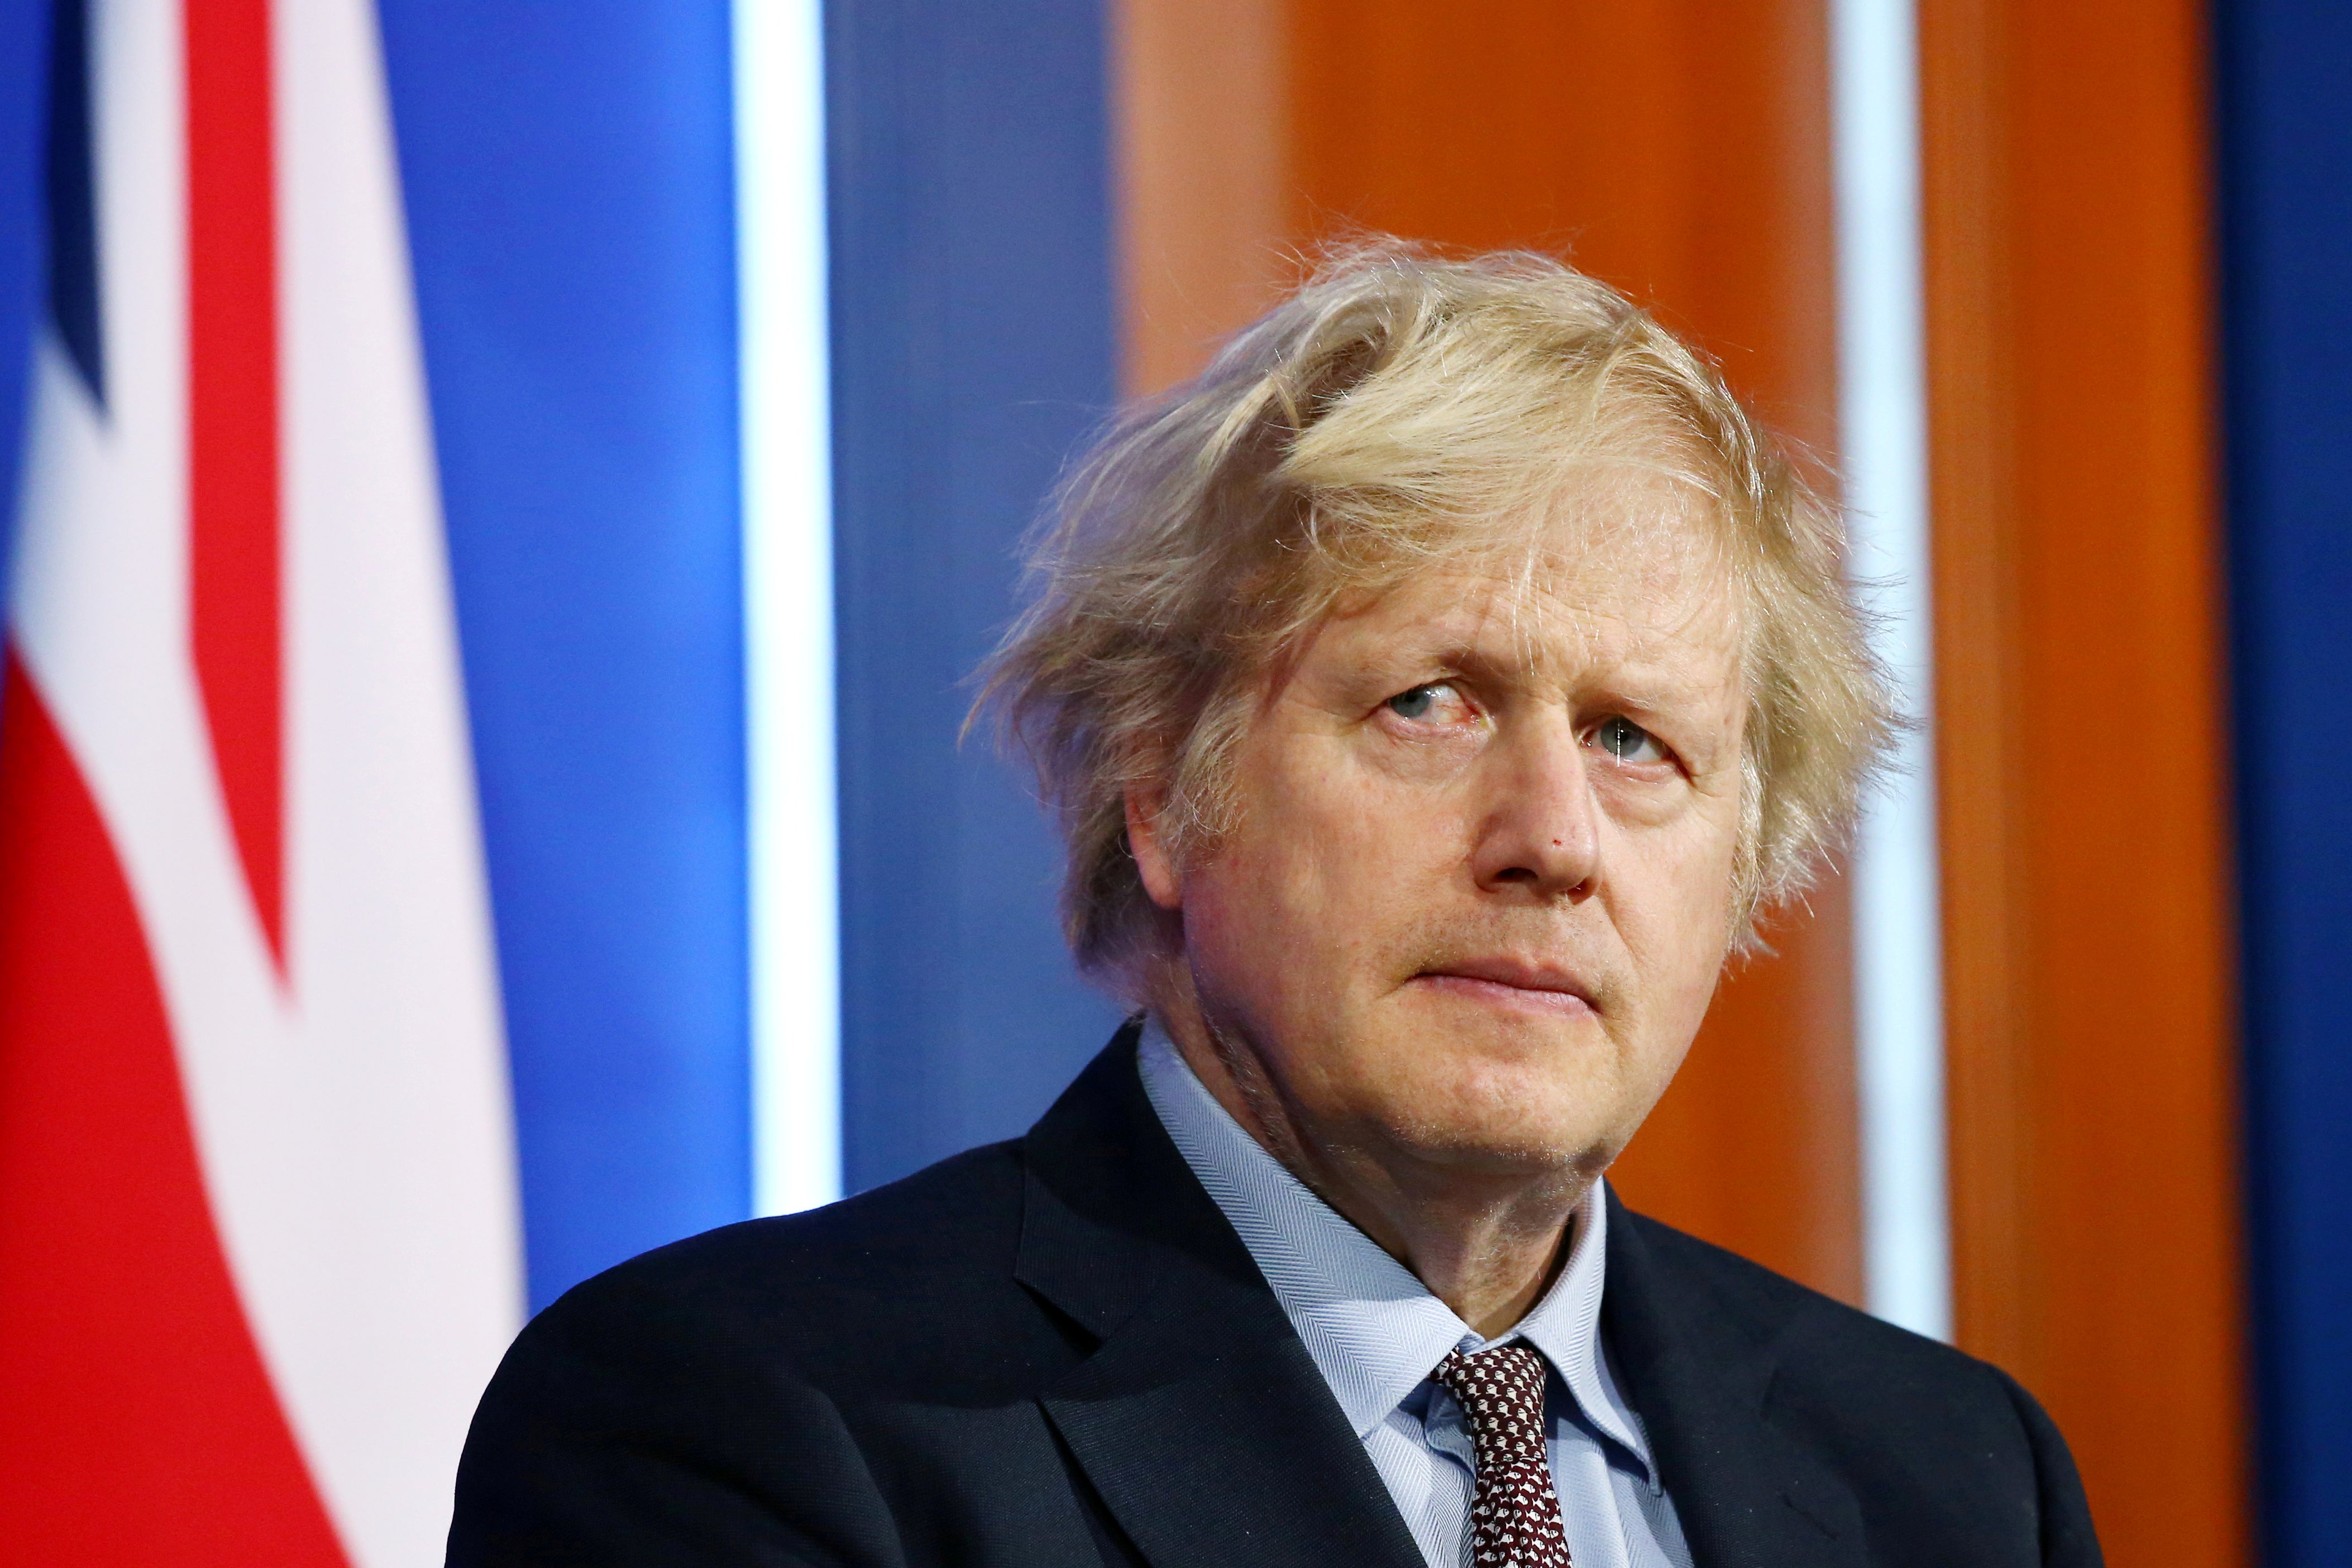 Boris Johnson agreed to ‘fix’ a tax issue for the industrialist